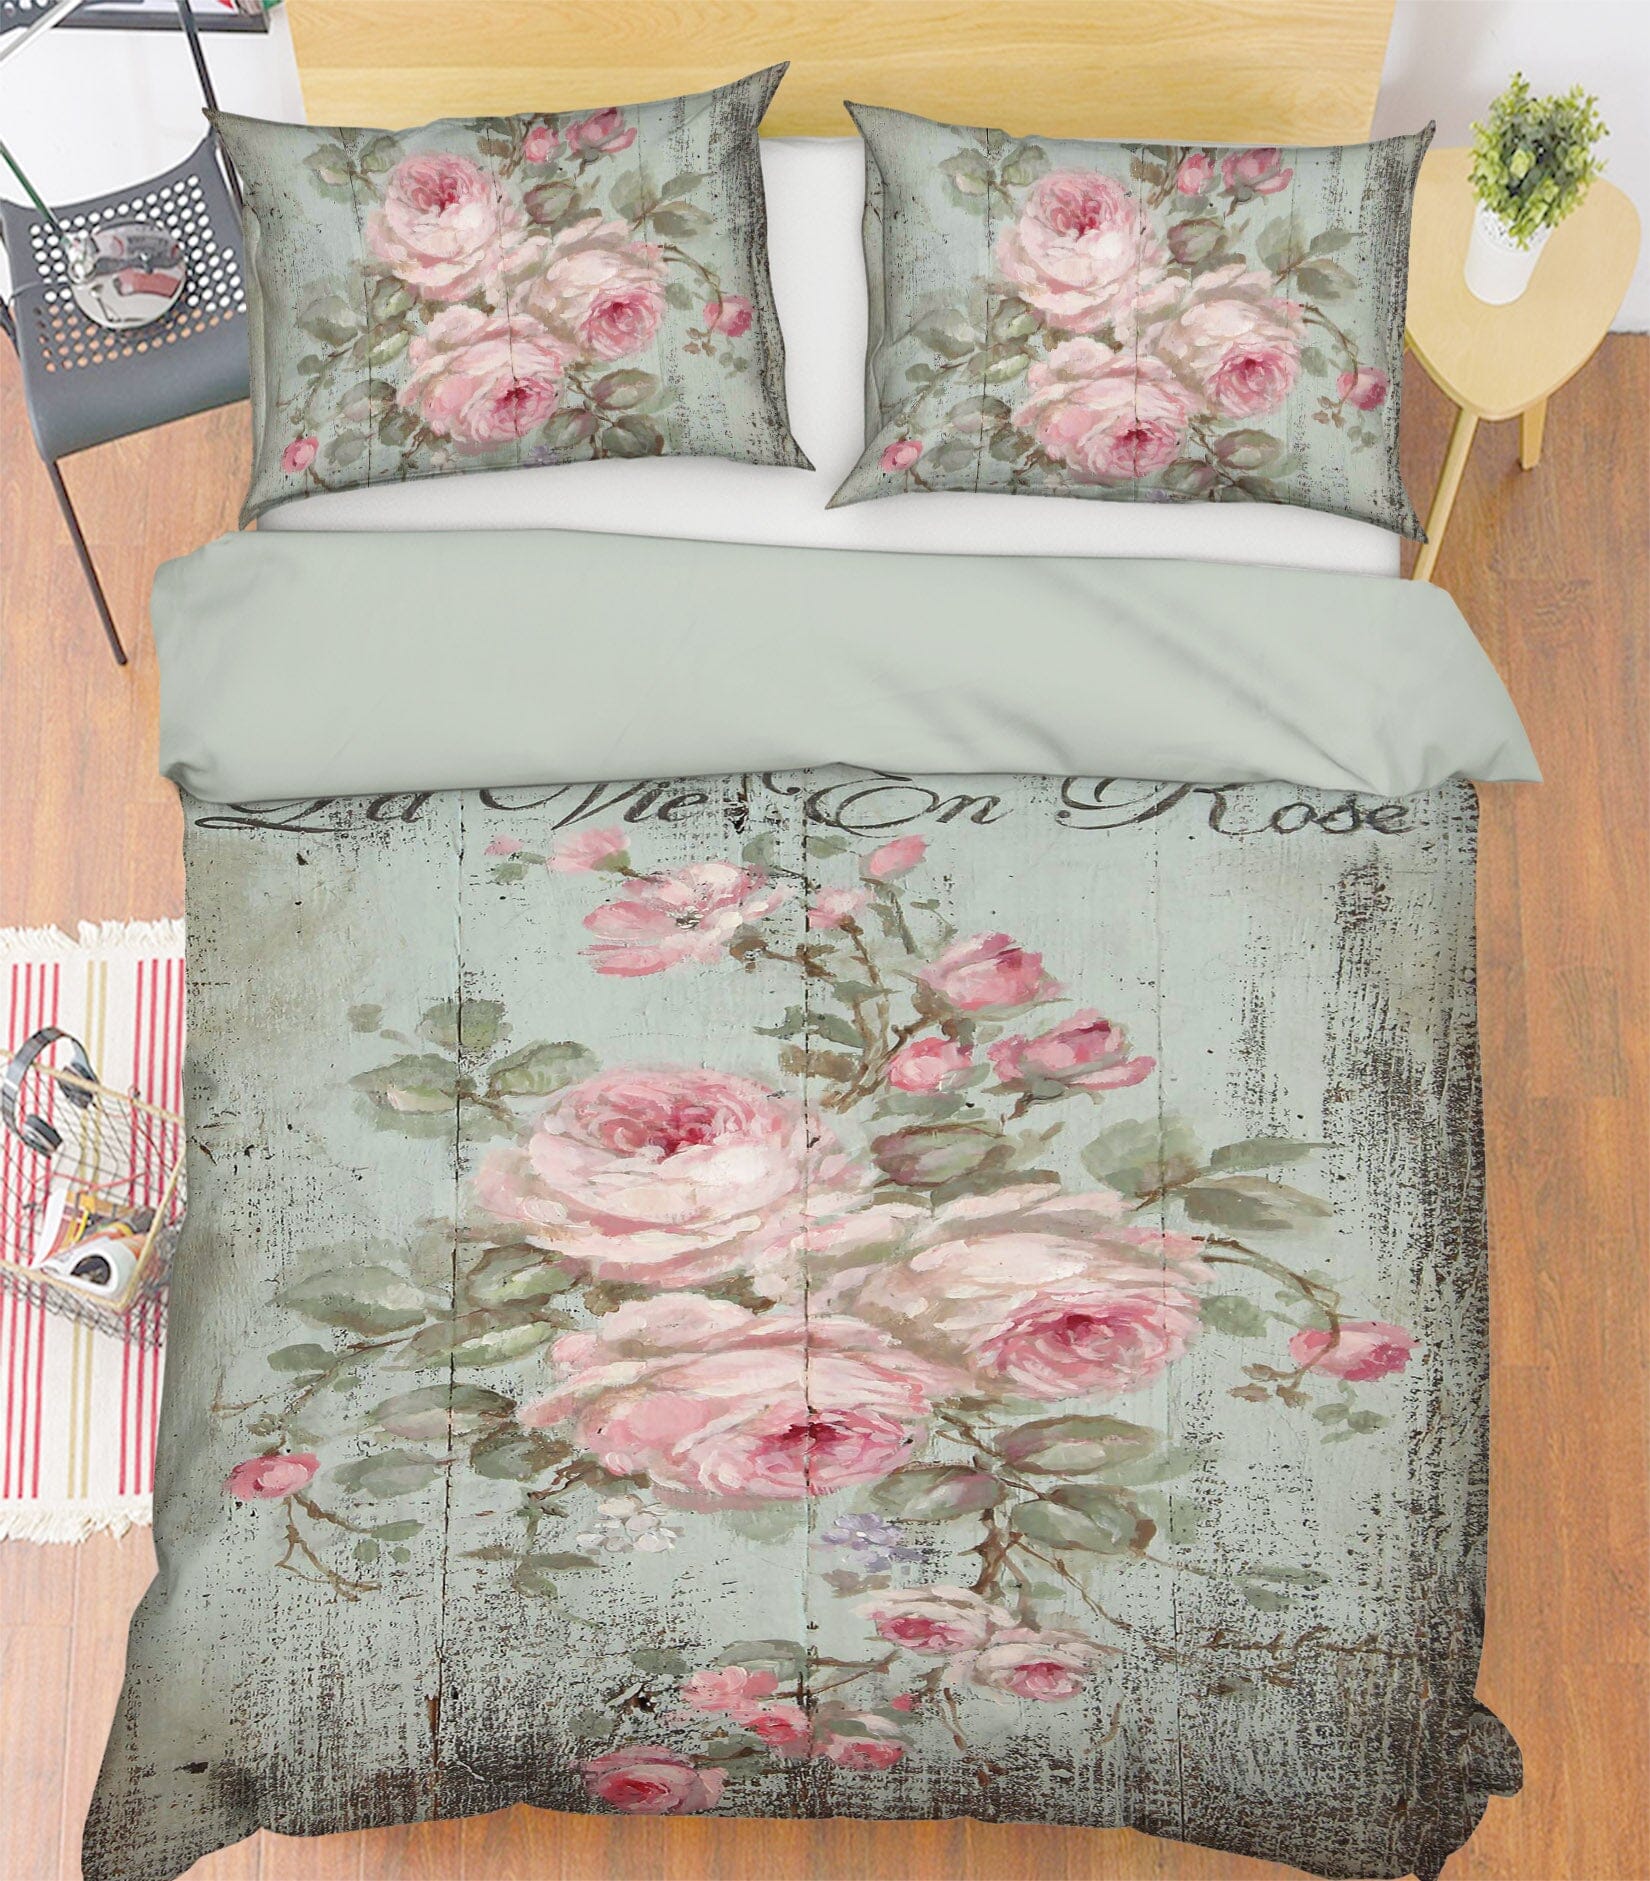 3D Pink Rose 032 Debi Coules Bedding Bed Pillowcases Quilt Quiet Covers AJ Creativity Home 